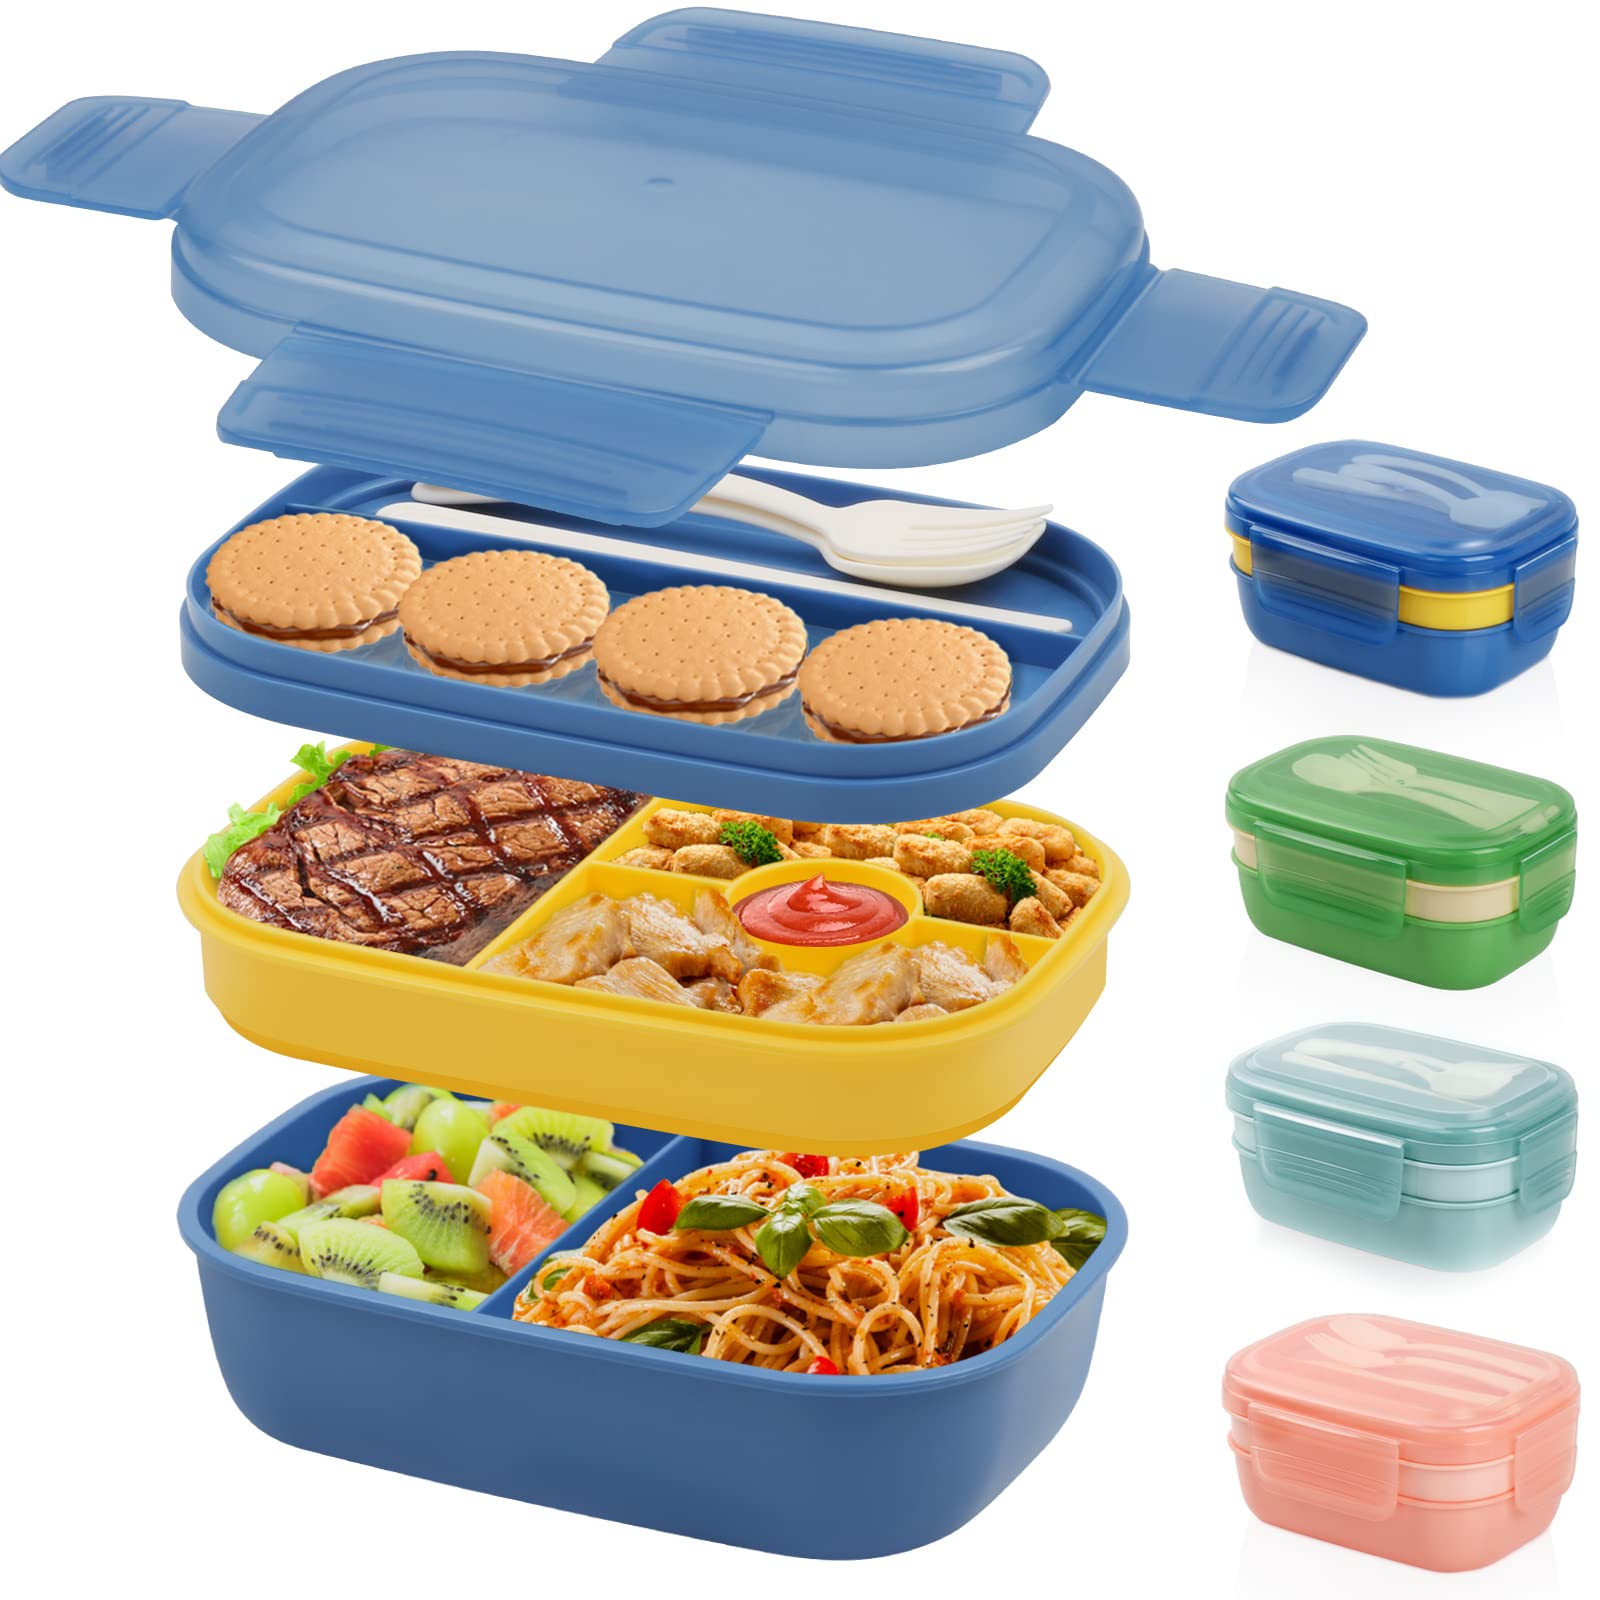 

1pc 1900ml/50.7oz Bento Box With Large Capacity, Leak-proof Lunch Box With Utensil Set For Dining Out, Work, Picnic, School